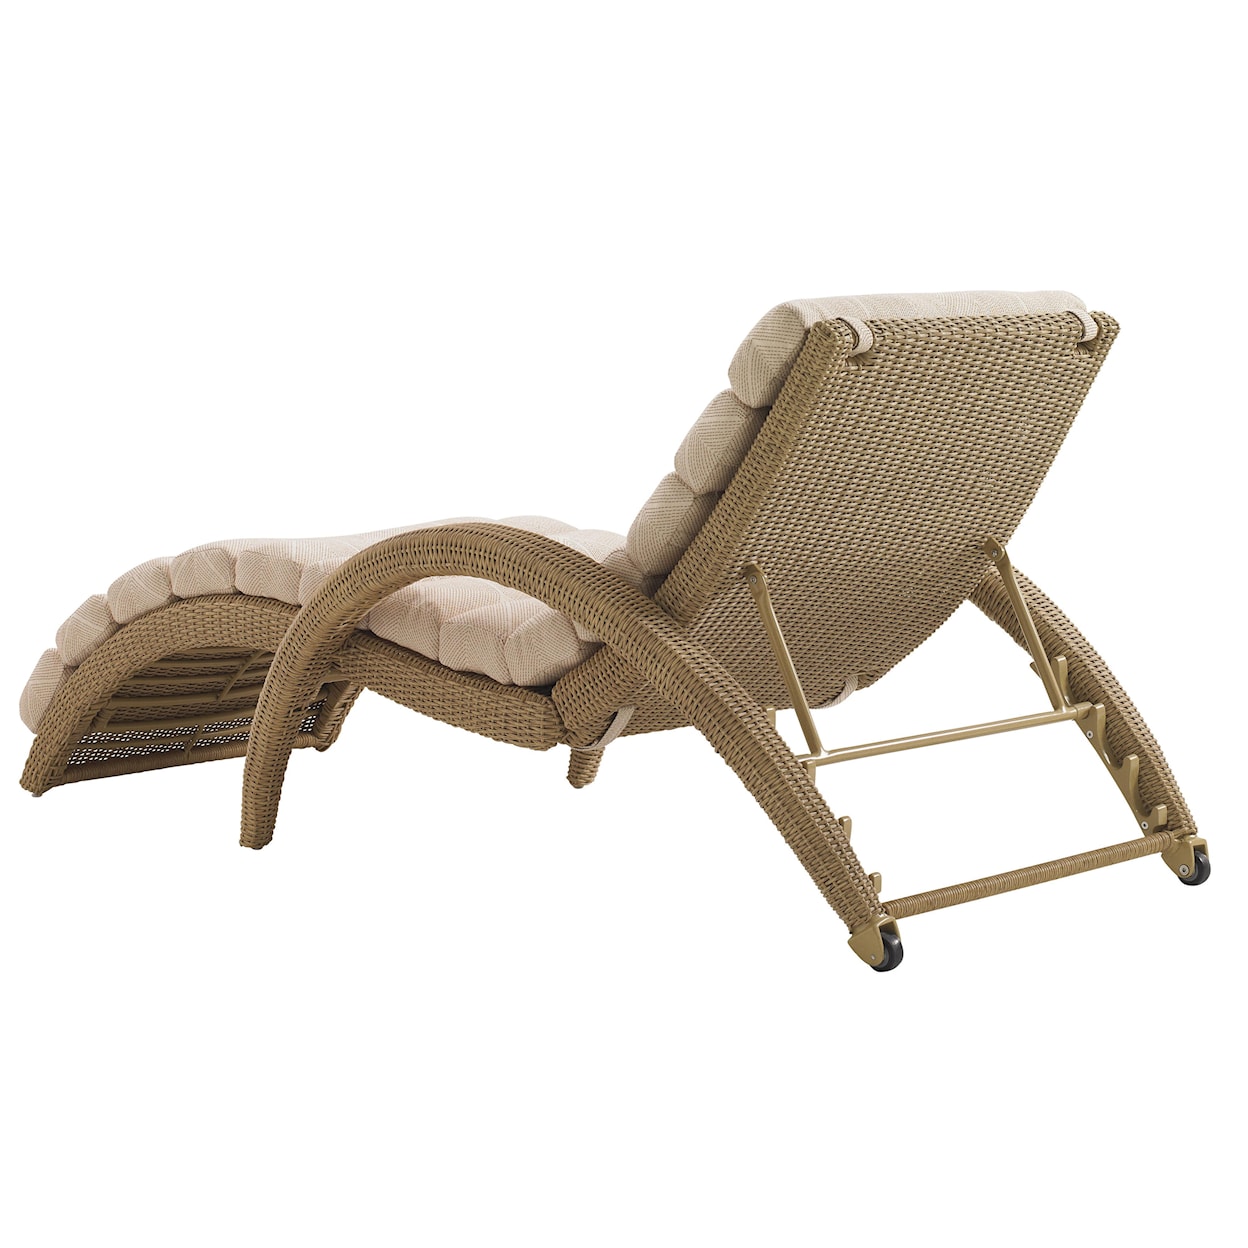 Tommy Bahama Outdoor Living Aviano Outdoor Chaise Lounge